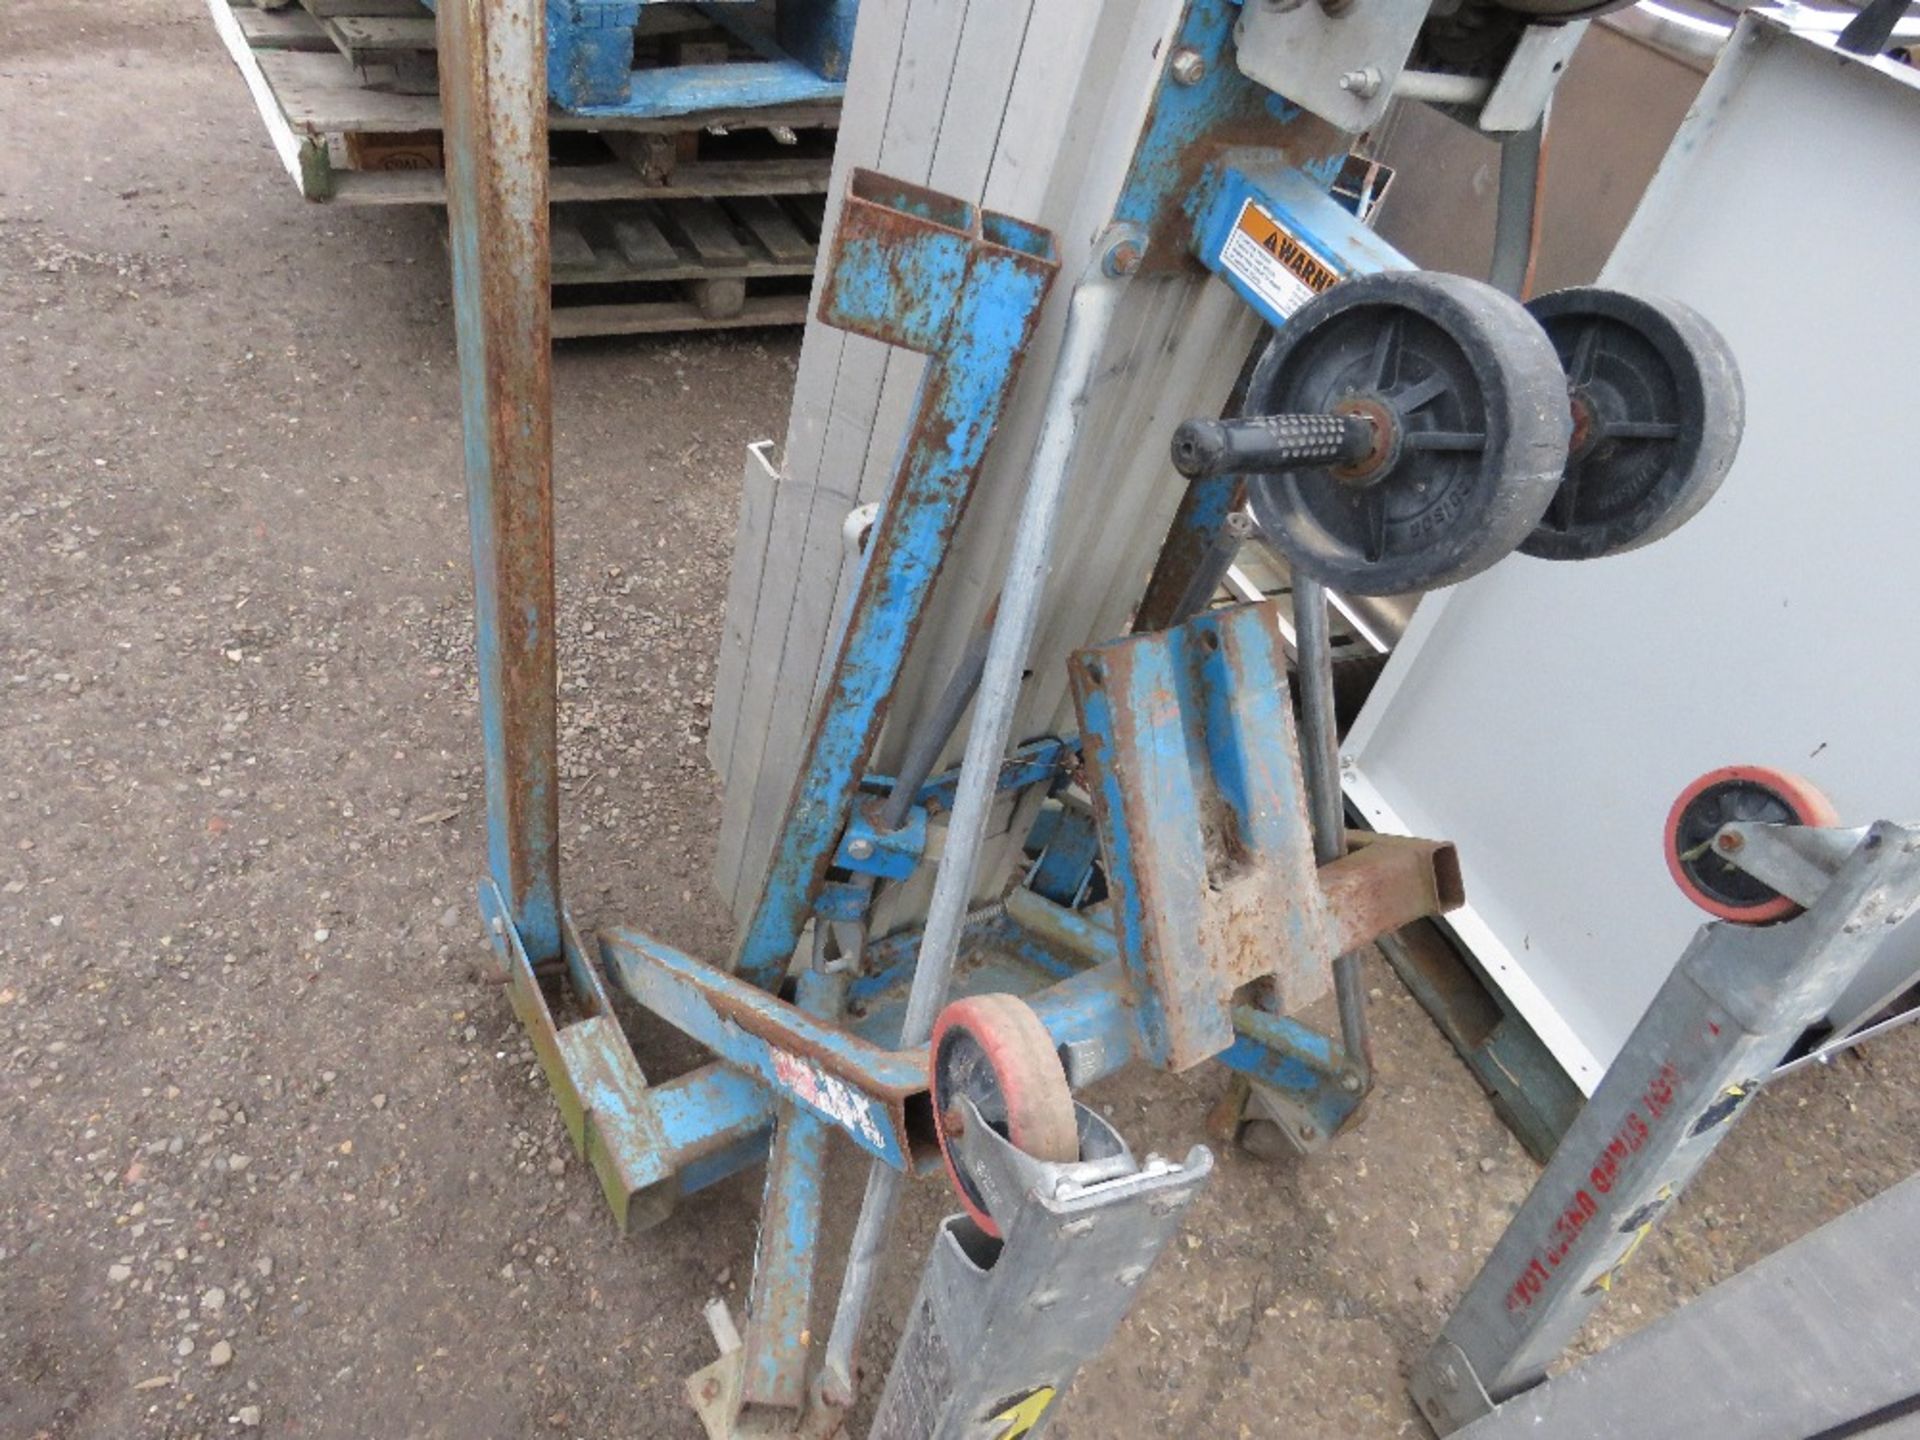 GENIE SL20 MANUAL OPERATED MATERIAL LIFT UNIT. WITH FORKS. DIRECT FROM LOCAL COMPANY. - Image 2 of 5